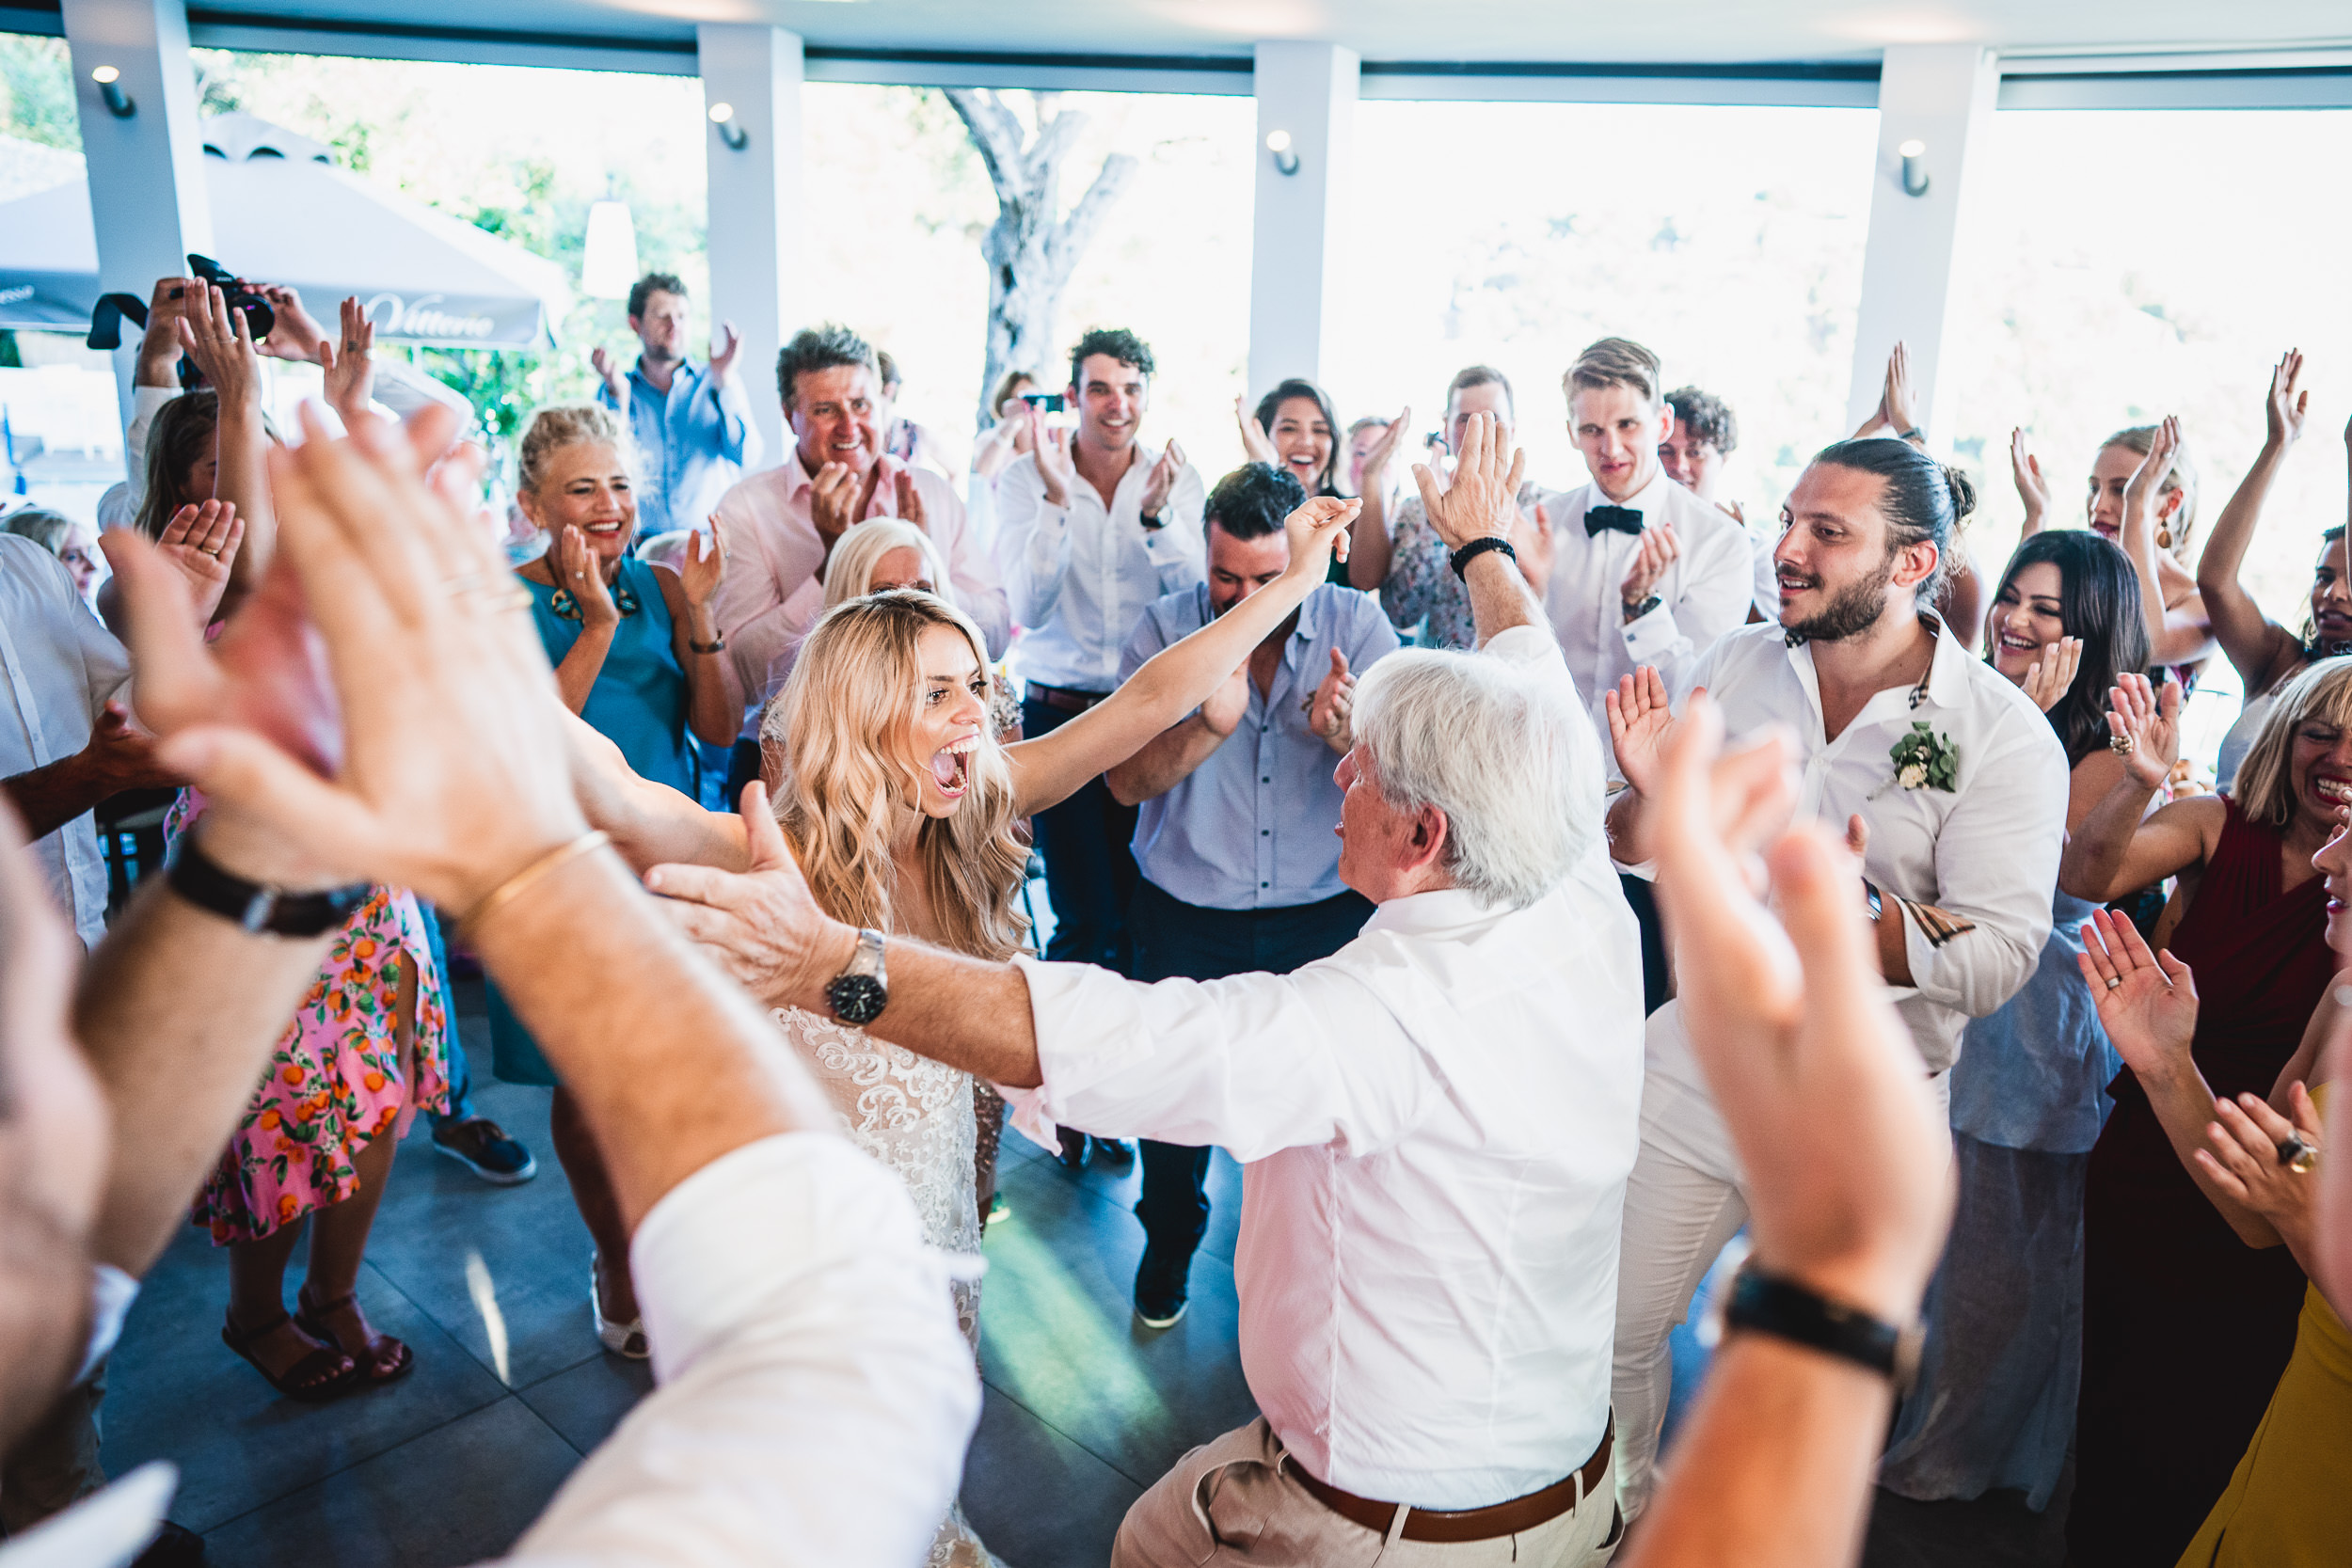 A group of people dancing at a wedding reception with the bride and groom.